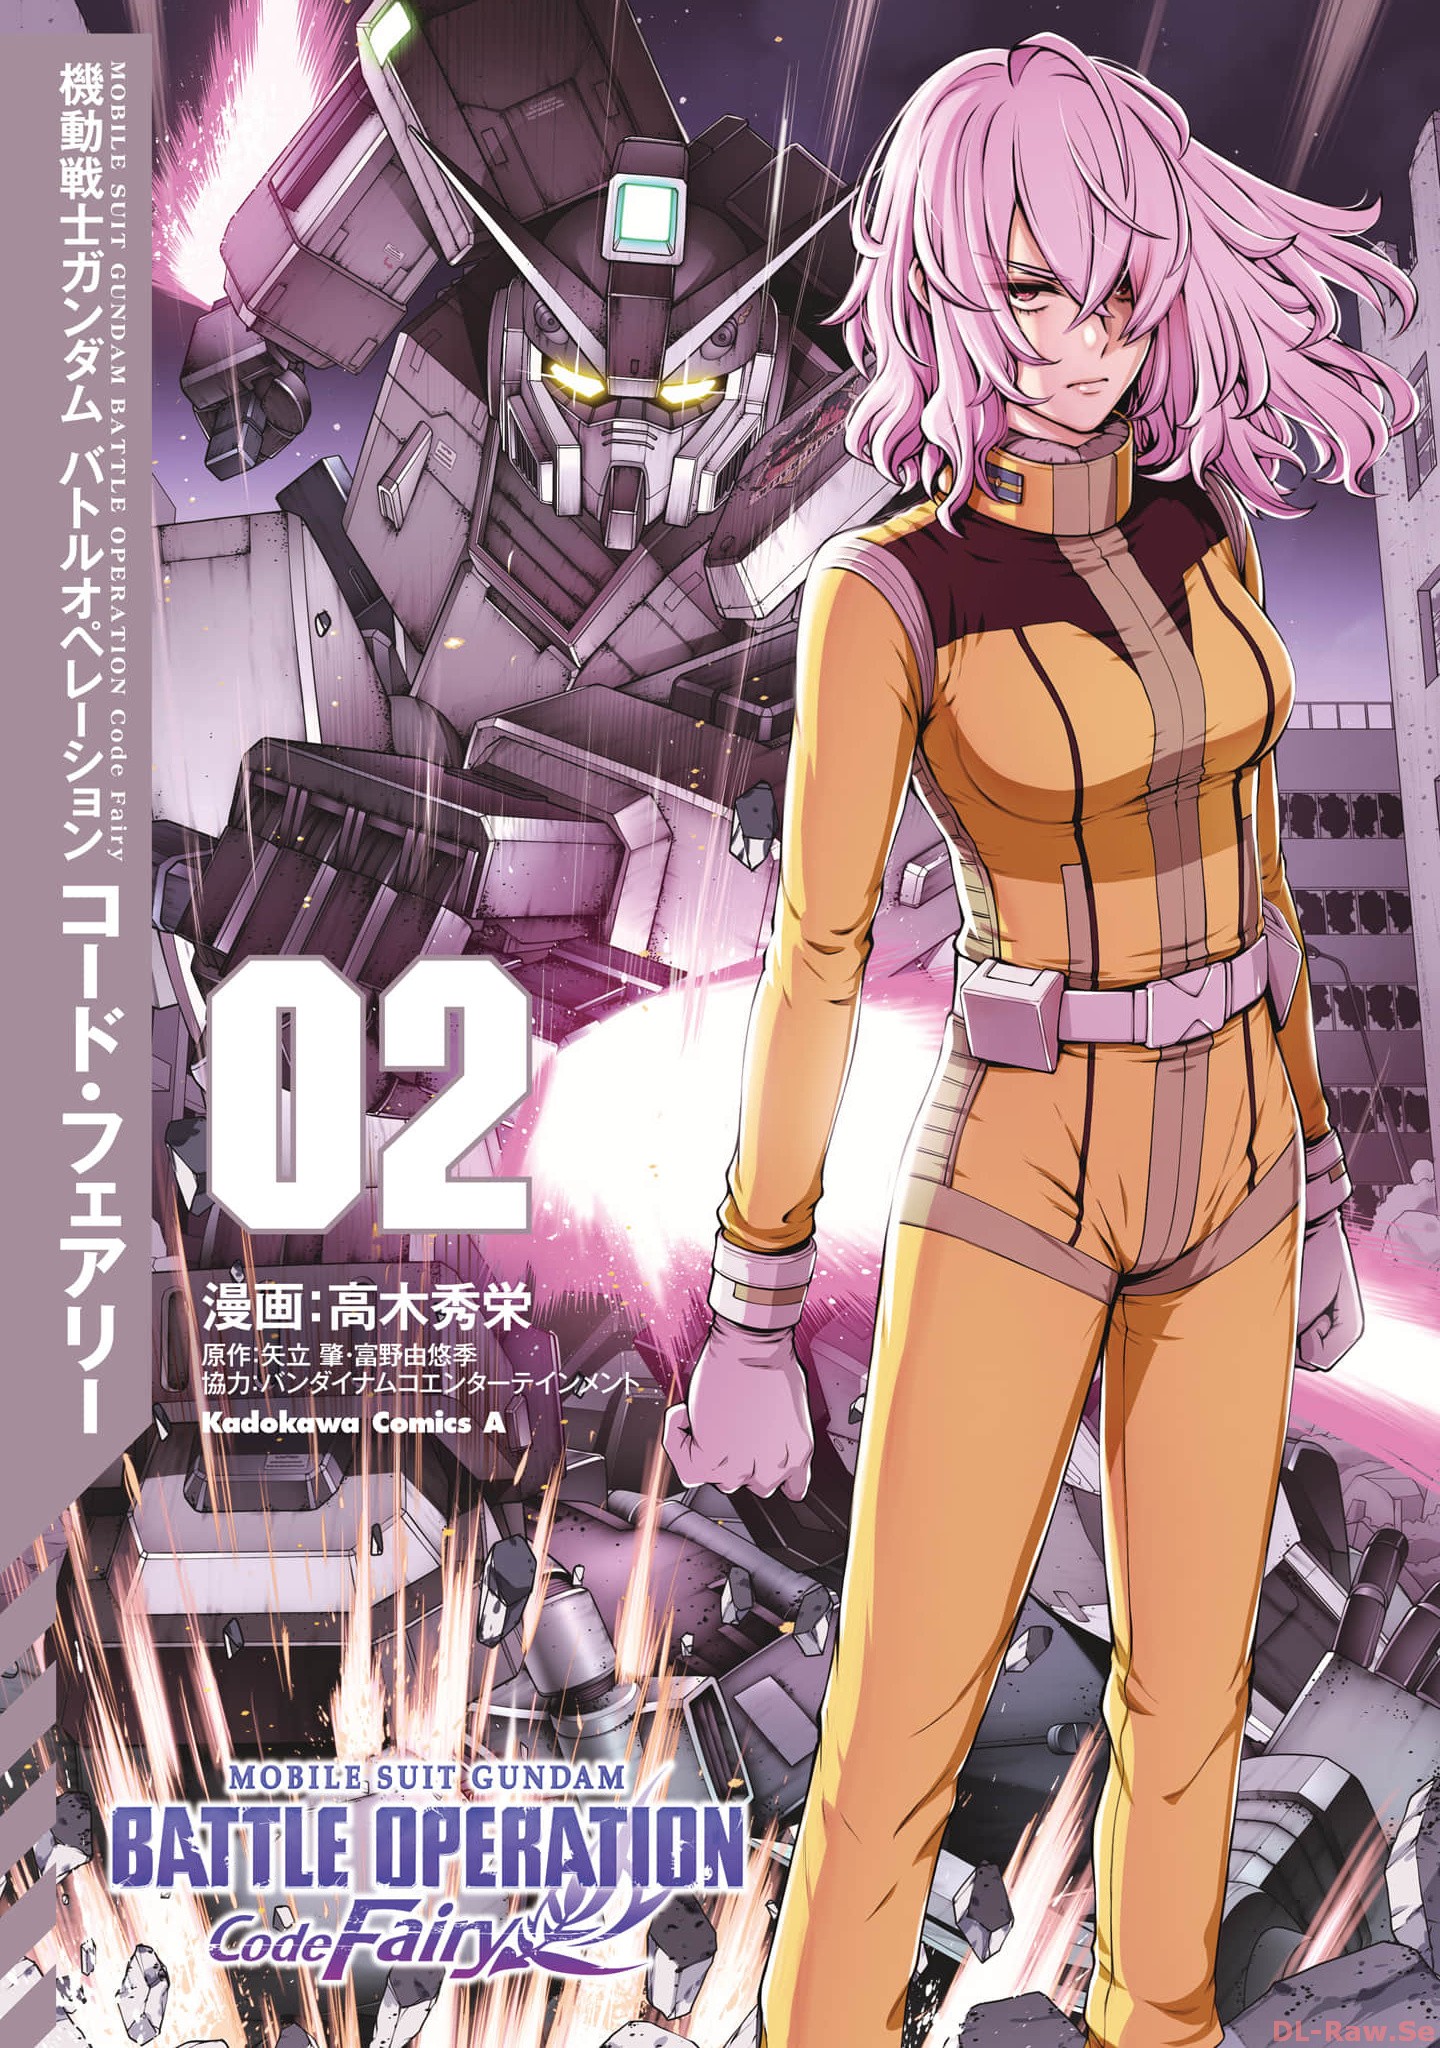 Mobile Suit Gundam: Battle Operation Code Fairy Vol.2 Chapter 7: A Warrior's Soul Sleeps In Arizona (Part Two) - Picture 1